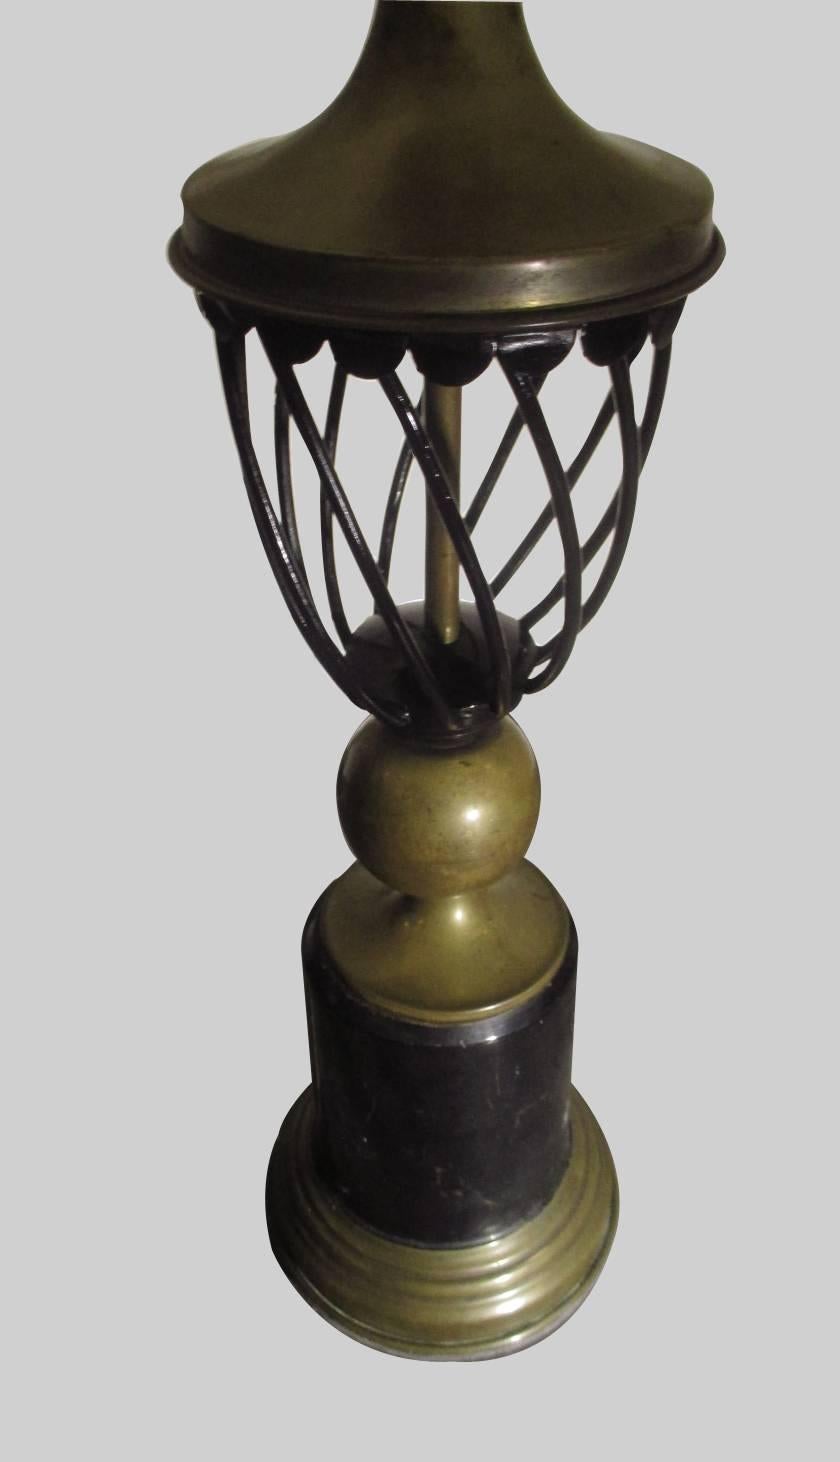 A table lamp in black metal and bronze made by Mexican master Arturo Pani. Beautiful original aging patina.
Measures with shade is 78cm height and 44cm in diameter.